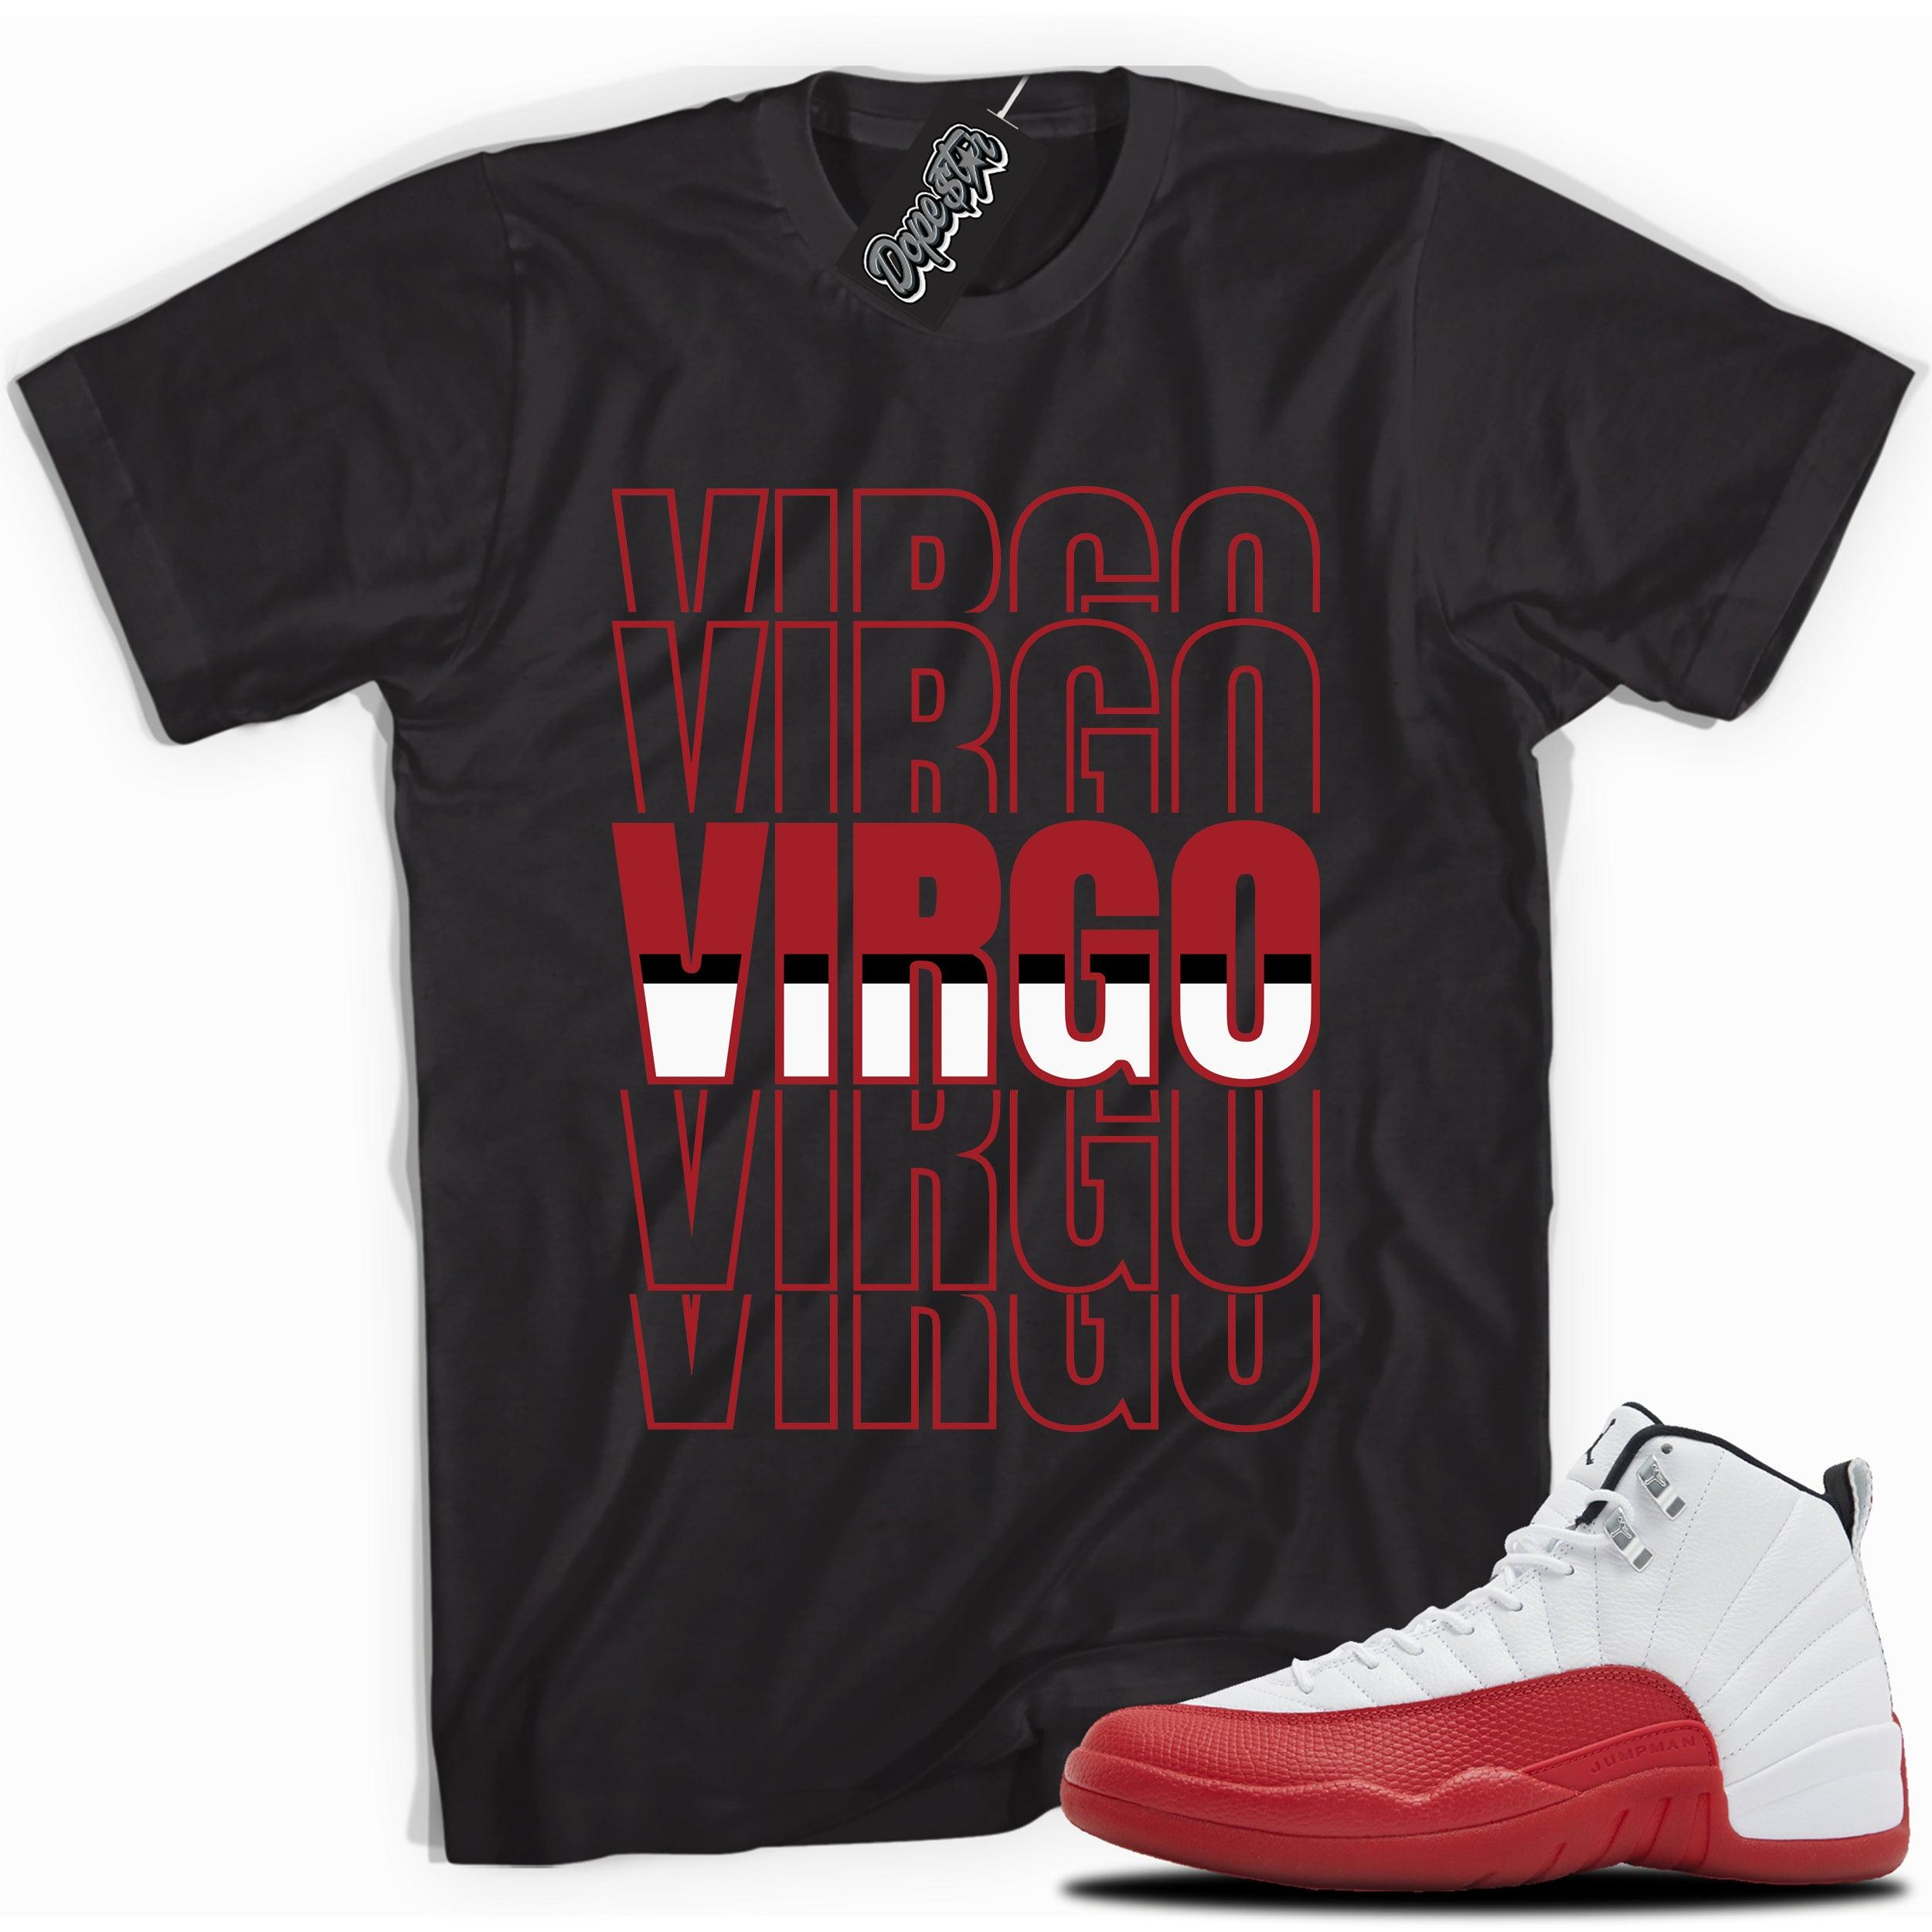 Cool black graphic tee with “VIRGO” print, that perfectly matches Air Jordan 12 Retro Cherry Red 2023 red and white sneakers 